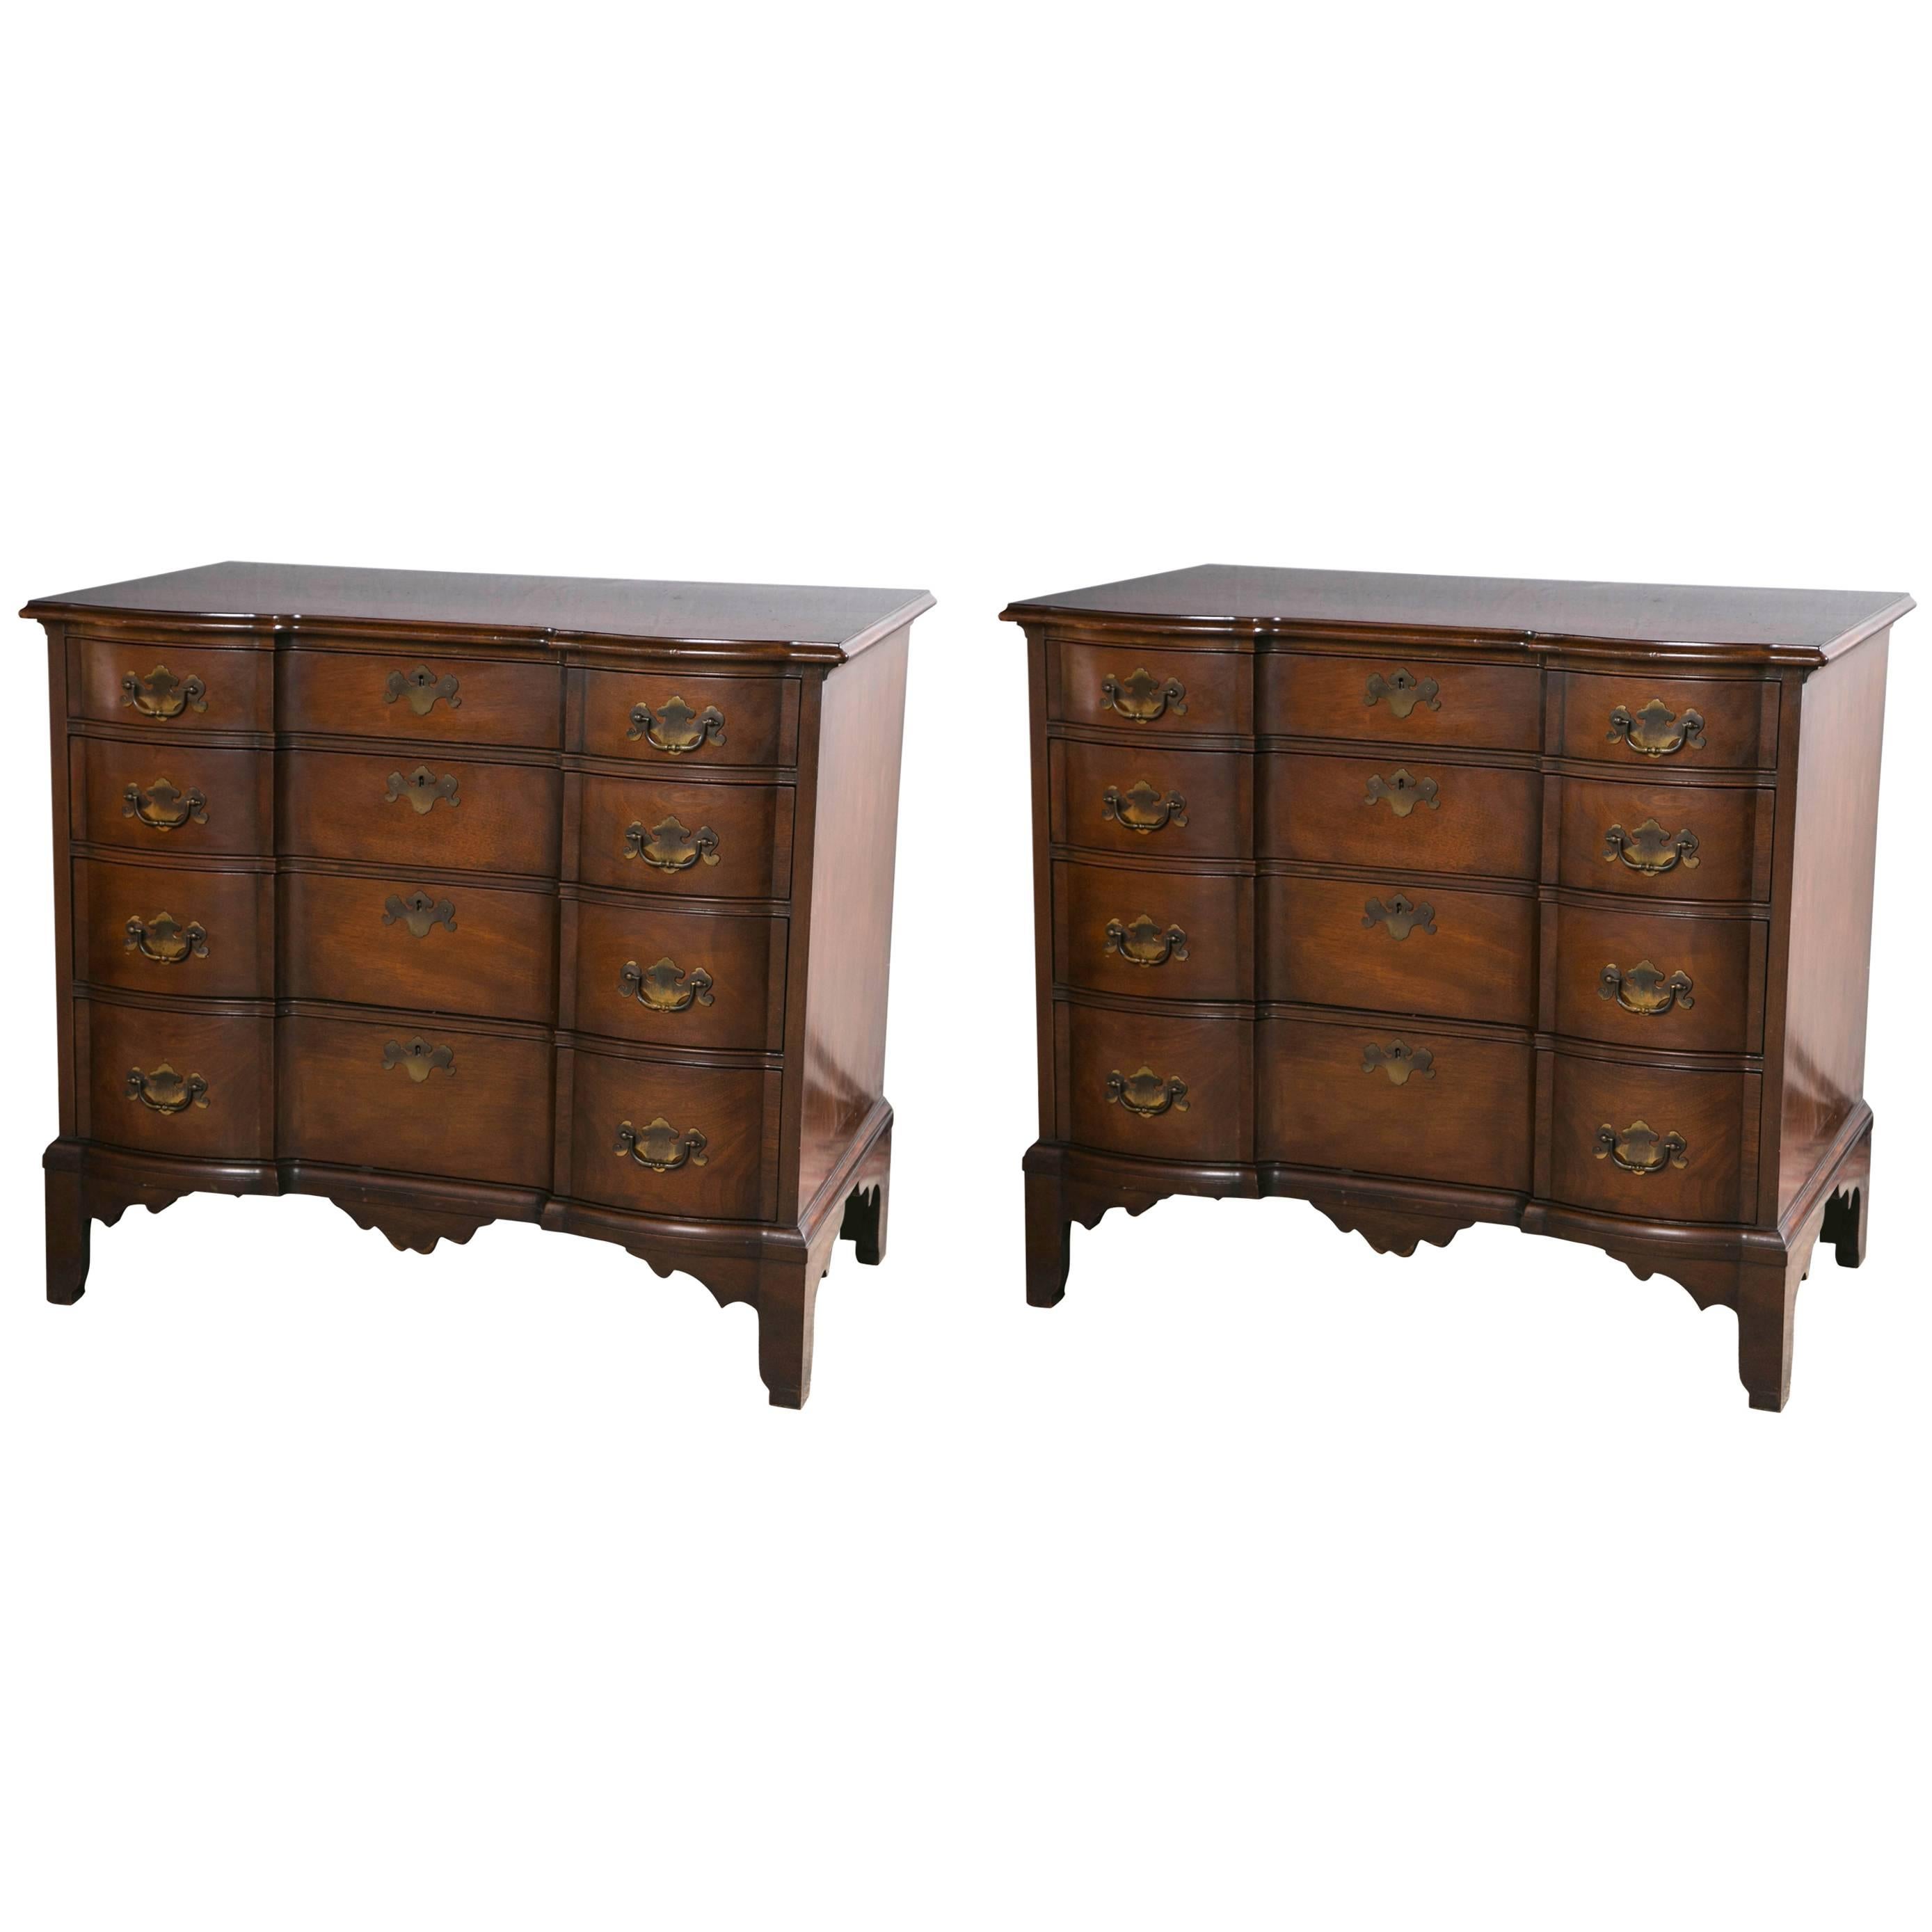 Pair of Georgian Style Bachelor Chests Commodes